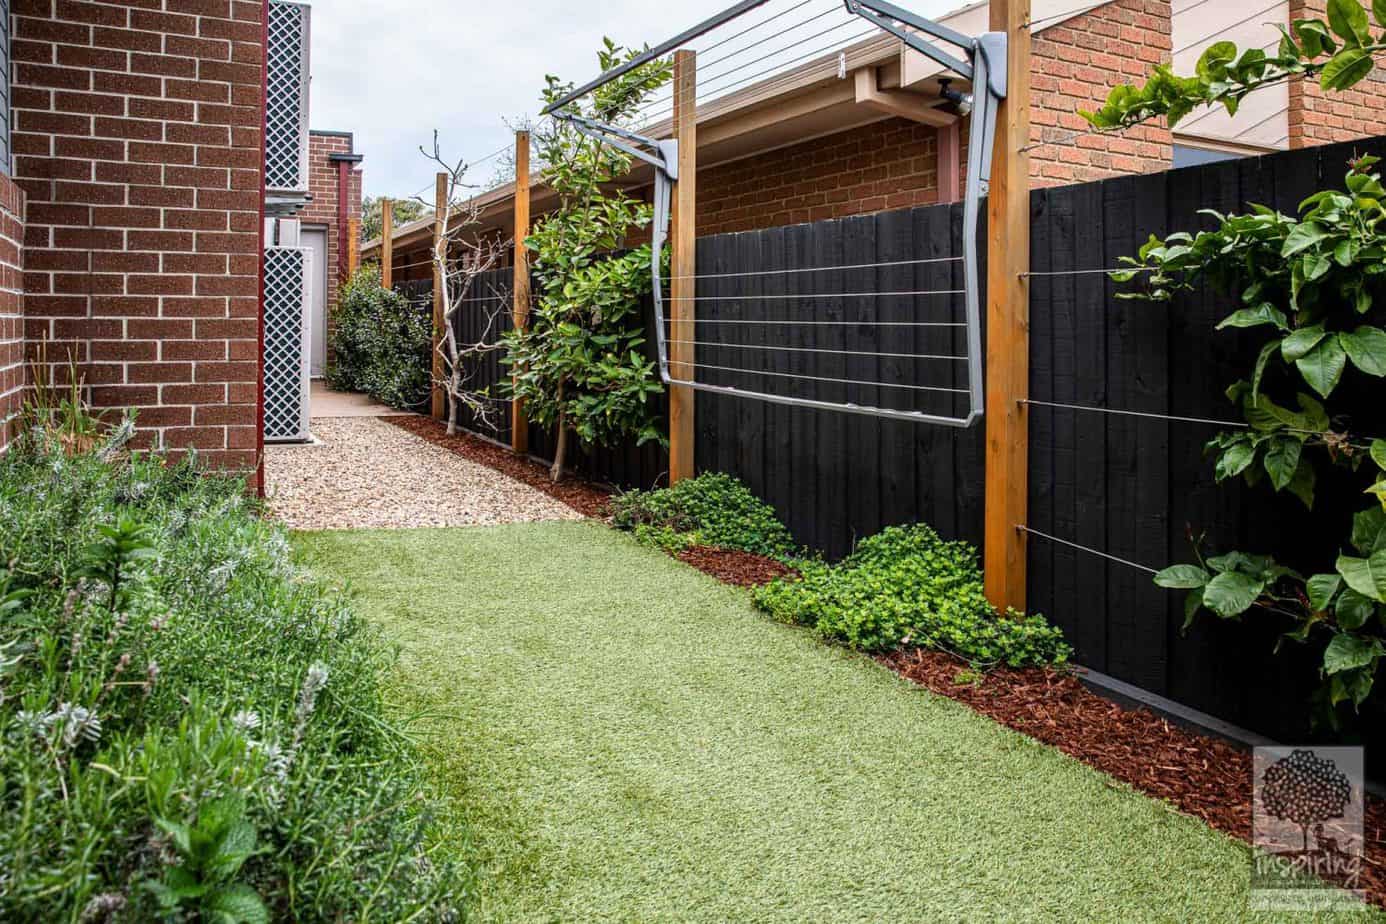 View of side area at the back of the property in Glen Waverley landscape design by Parveen Dhaliwal